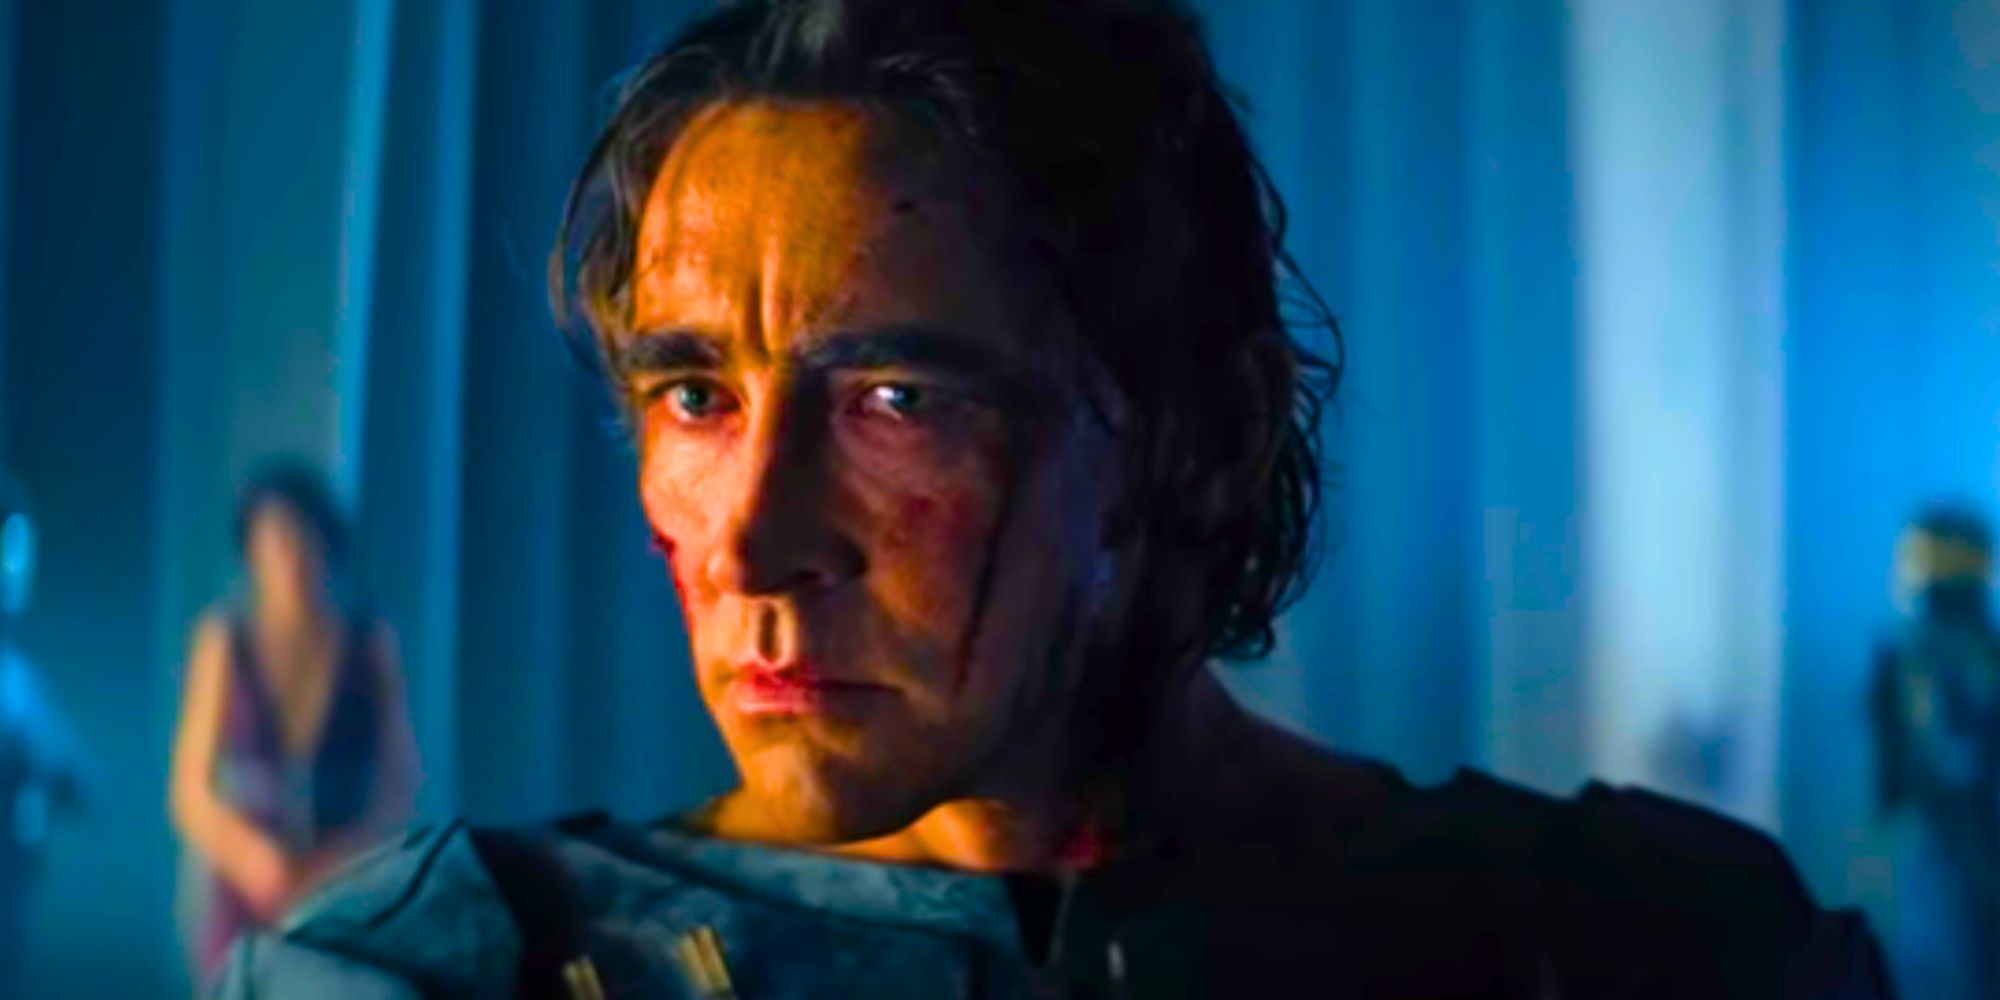 Lee Pace as Brother Day with blood on his face looking slightly scared in Foundation